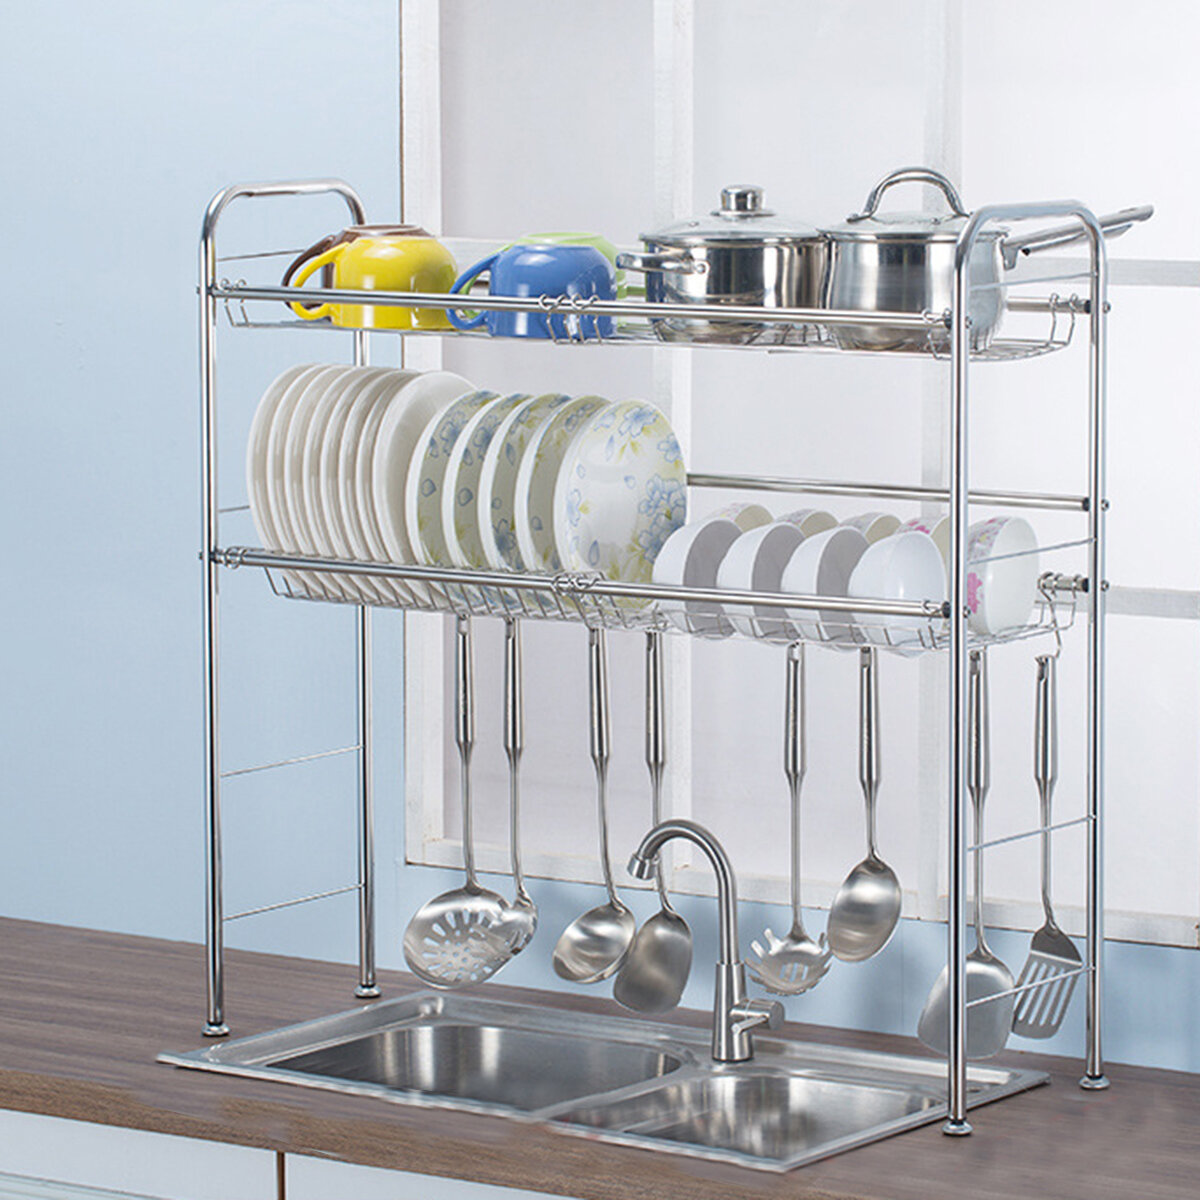 2 Tiers Stainless Steel Dishes Rack Dual Sink Drain Rack Adjustable Multi-use Kitchen Organizer Rack